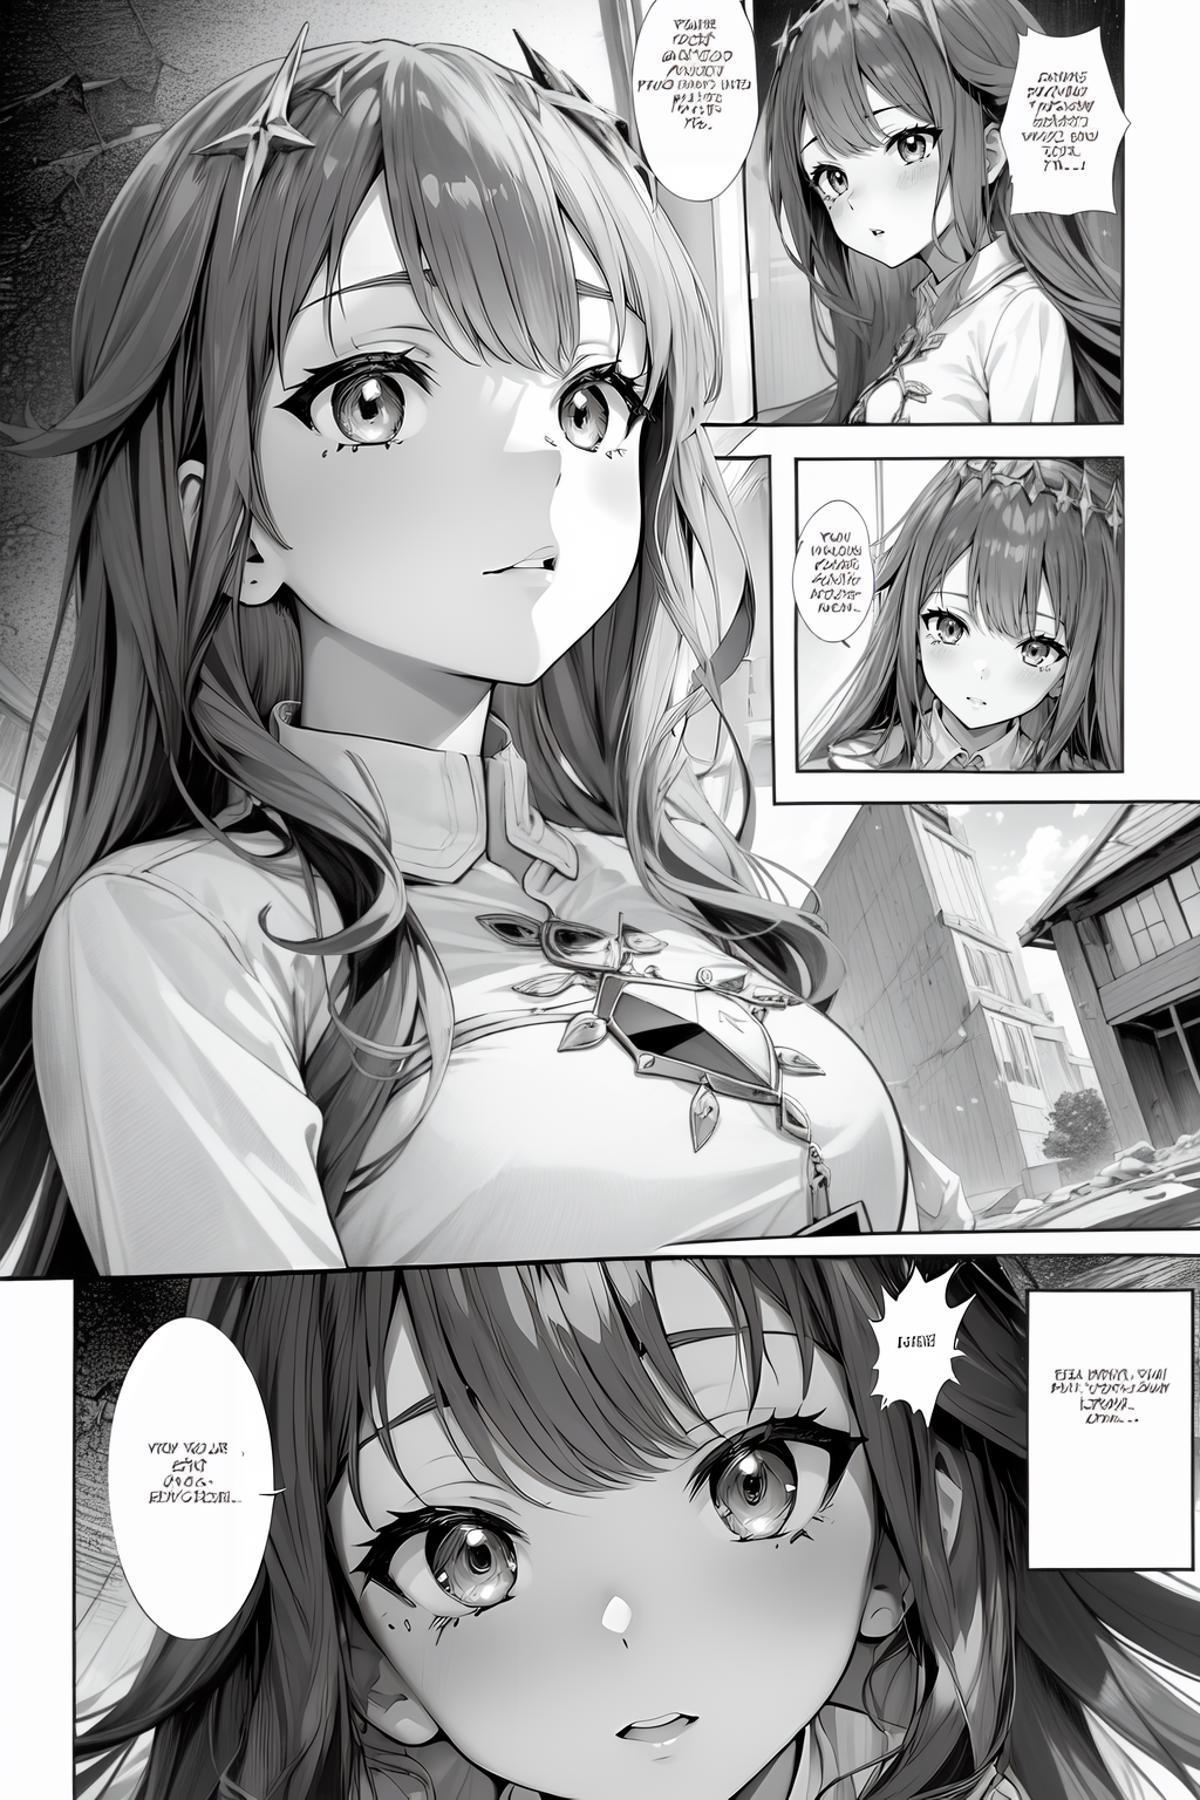 A beautiful woman in a white dress is featured in a manga comic.